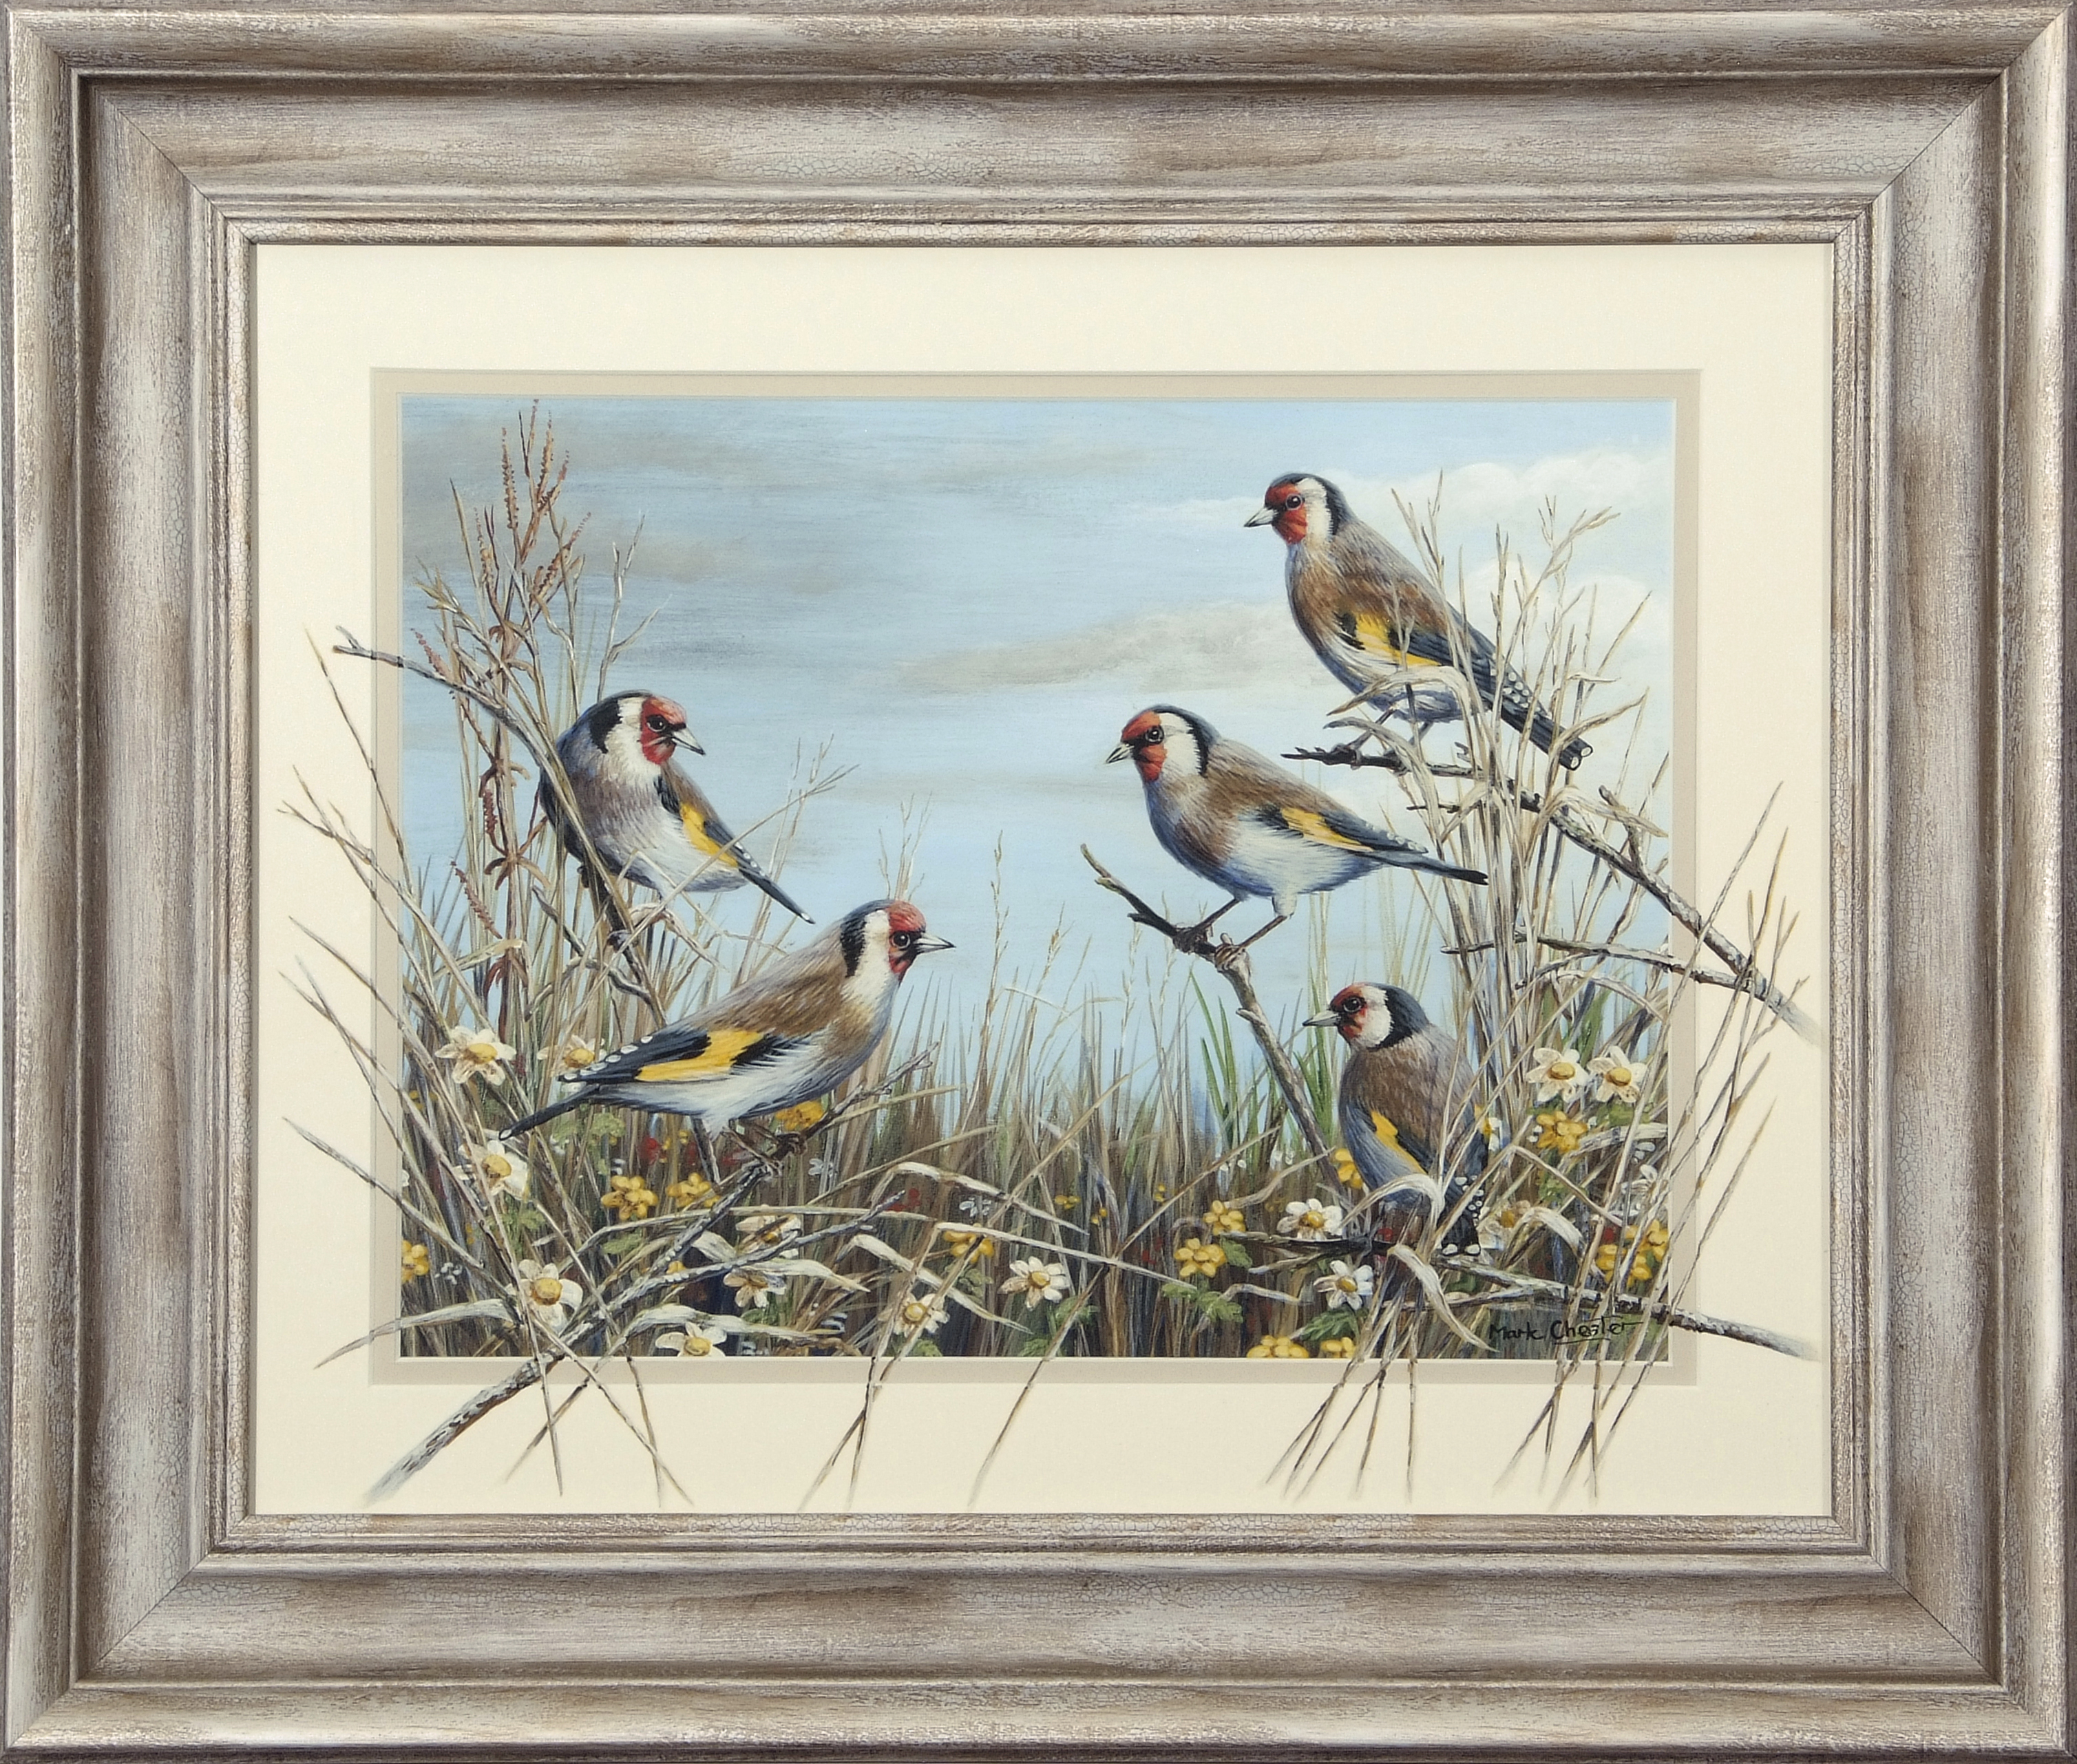 Mark Chester (contemporary), "Summer Charm - Goldfinches", acrylic, signed lower right, 24 x 32cm